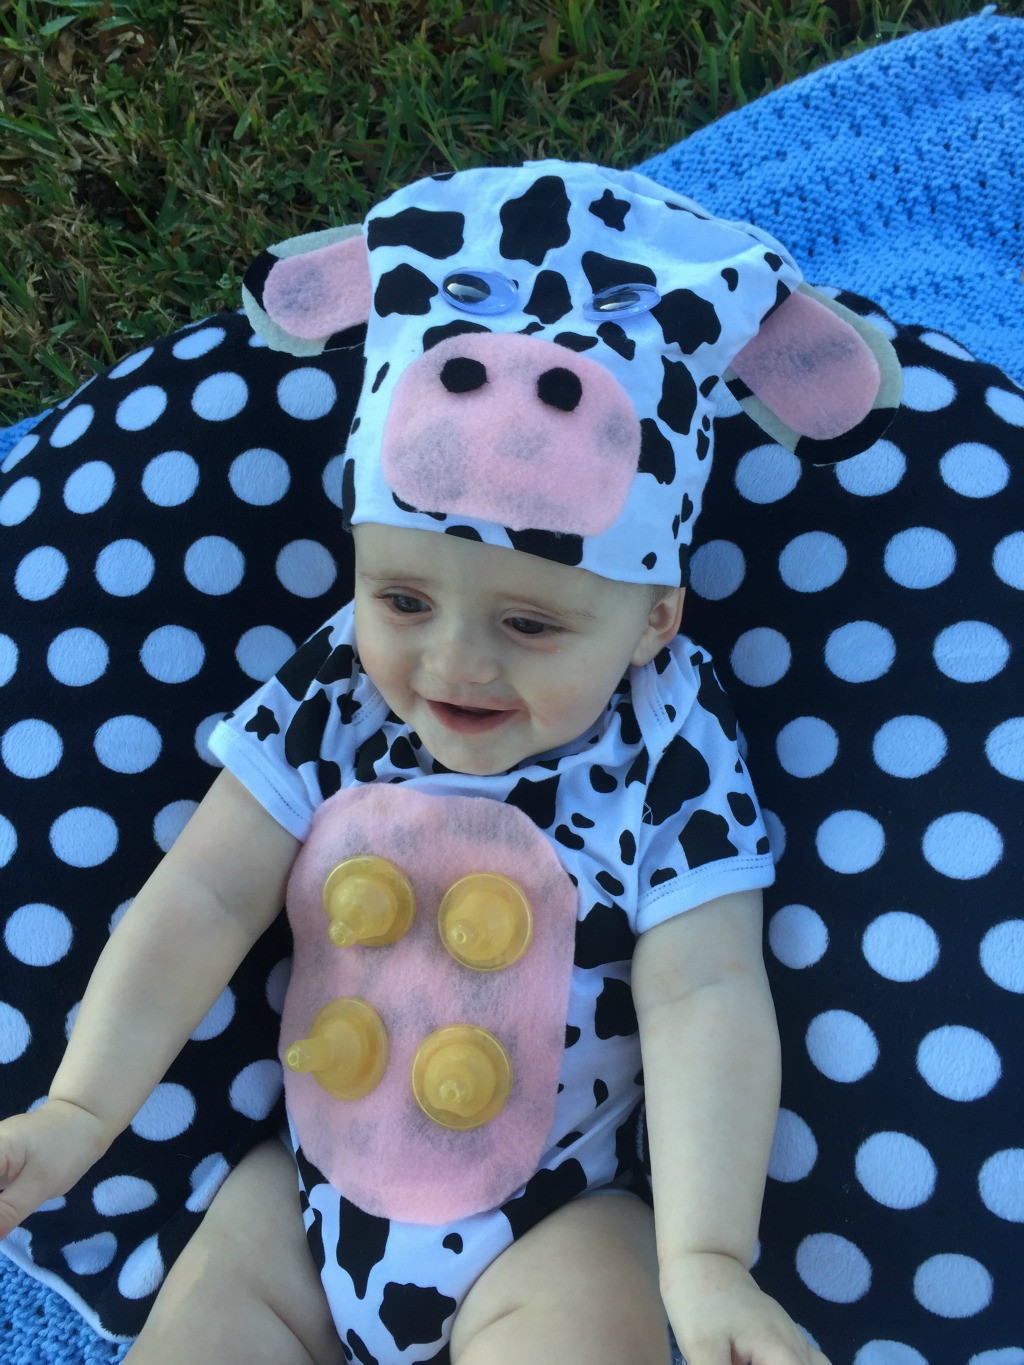 DIY Cow Costume
 Easy DIY Halloween Costume Udderly Adorable Cow Take